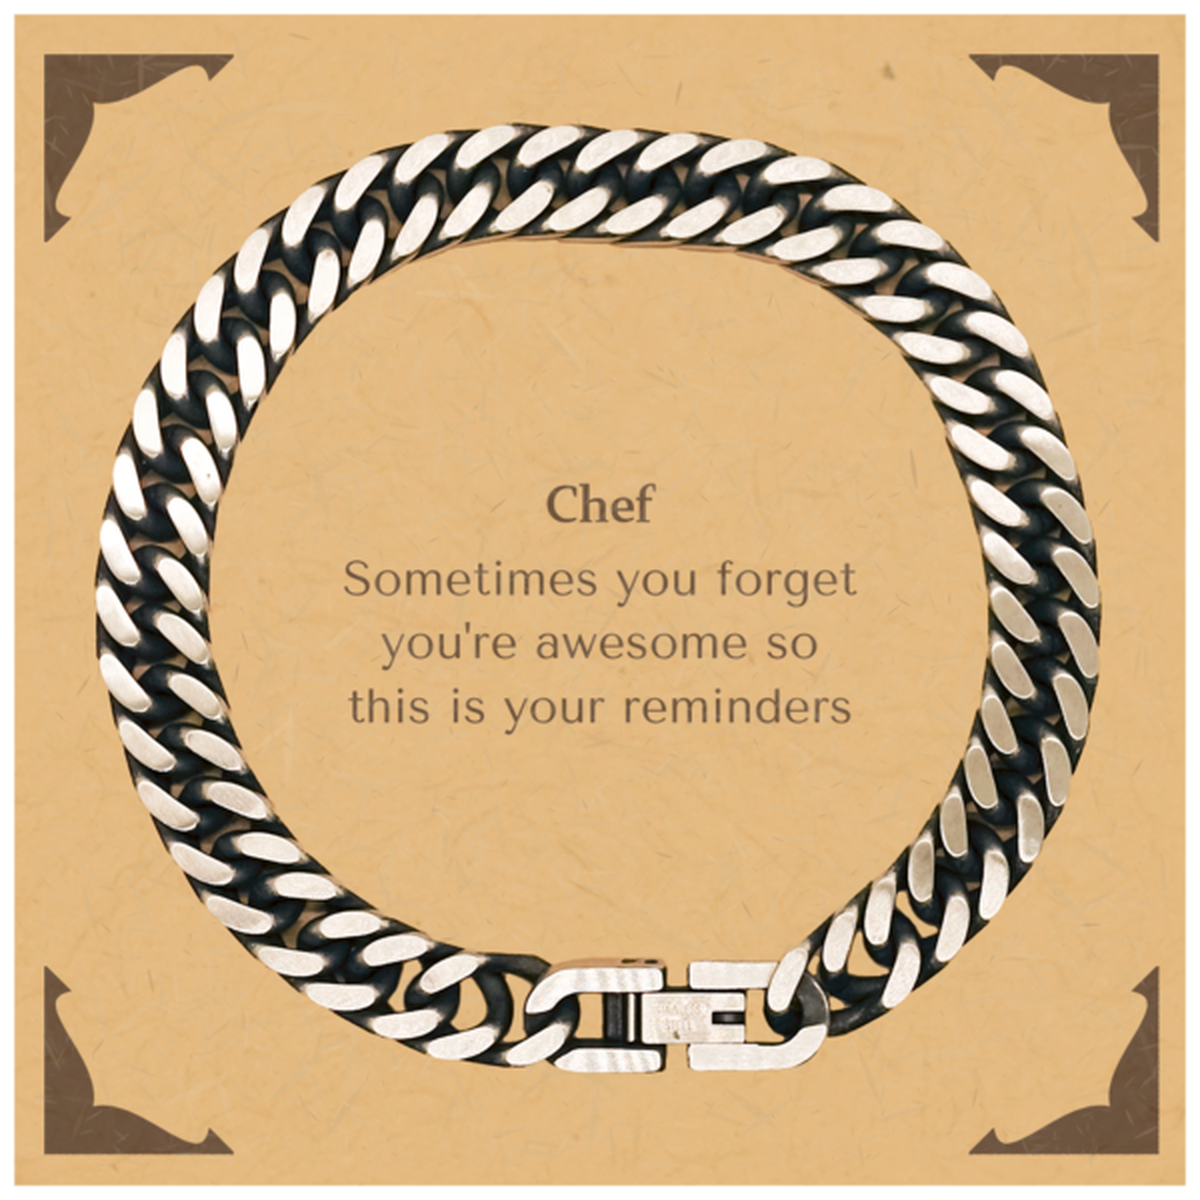 Sentimental Chef Cuban Link Chain Bracelet, Chef Sometimes you forget you're awesome so this is your reminders, Graduation Christmas Birthday Gifts for Chef, Men, Women, Coworkers